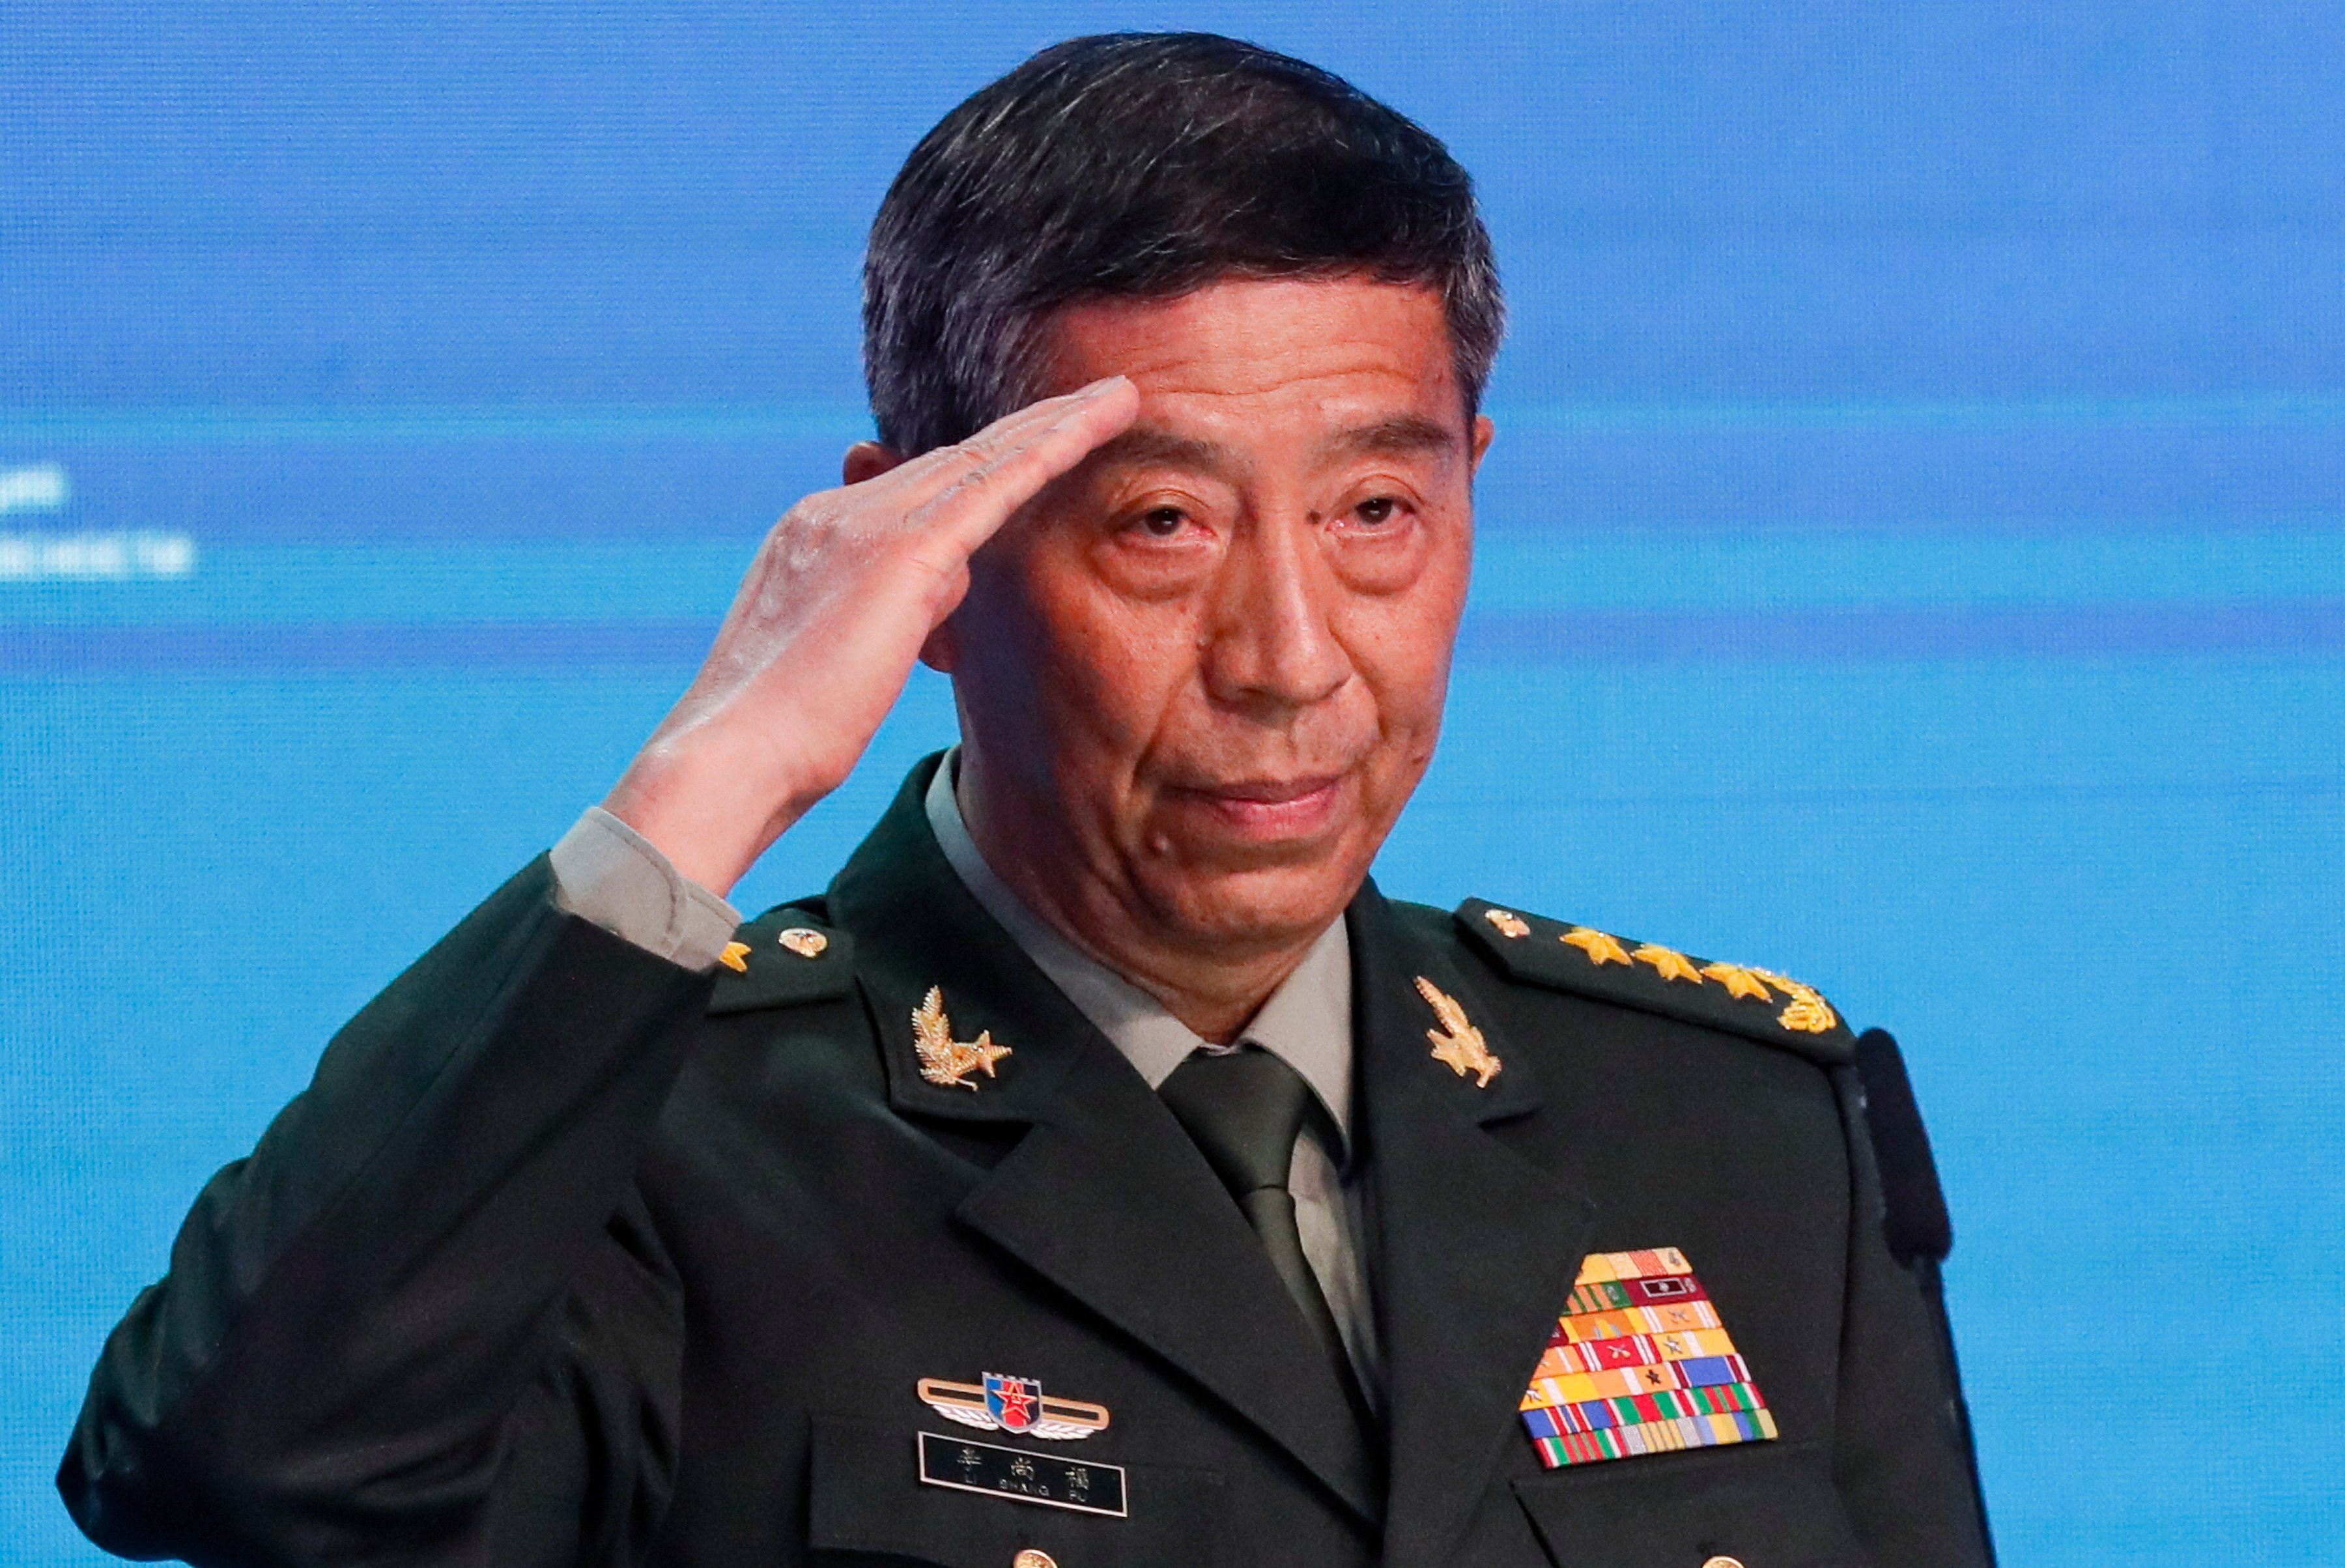 General Li Shangfu was last seen in public in late August when he attended a China-Africa security dialogue in Beijing. Photo: EPA-EFE